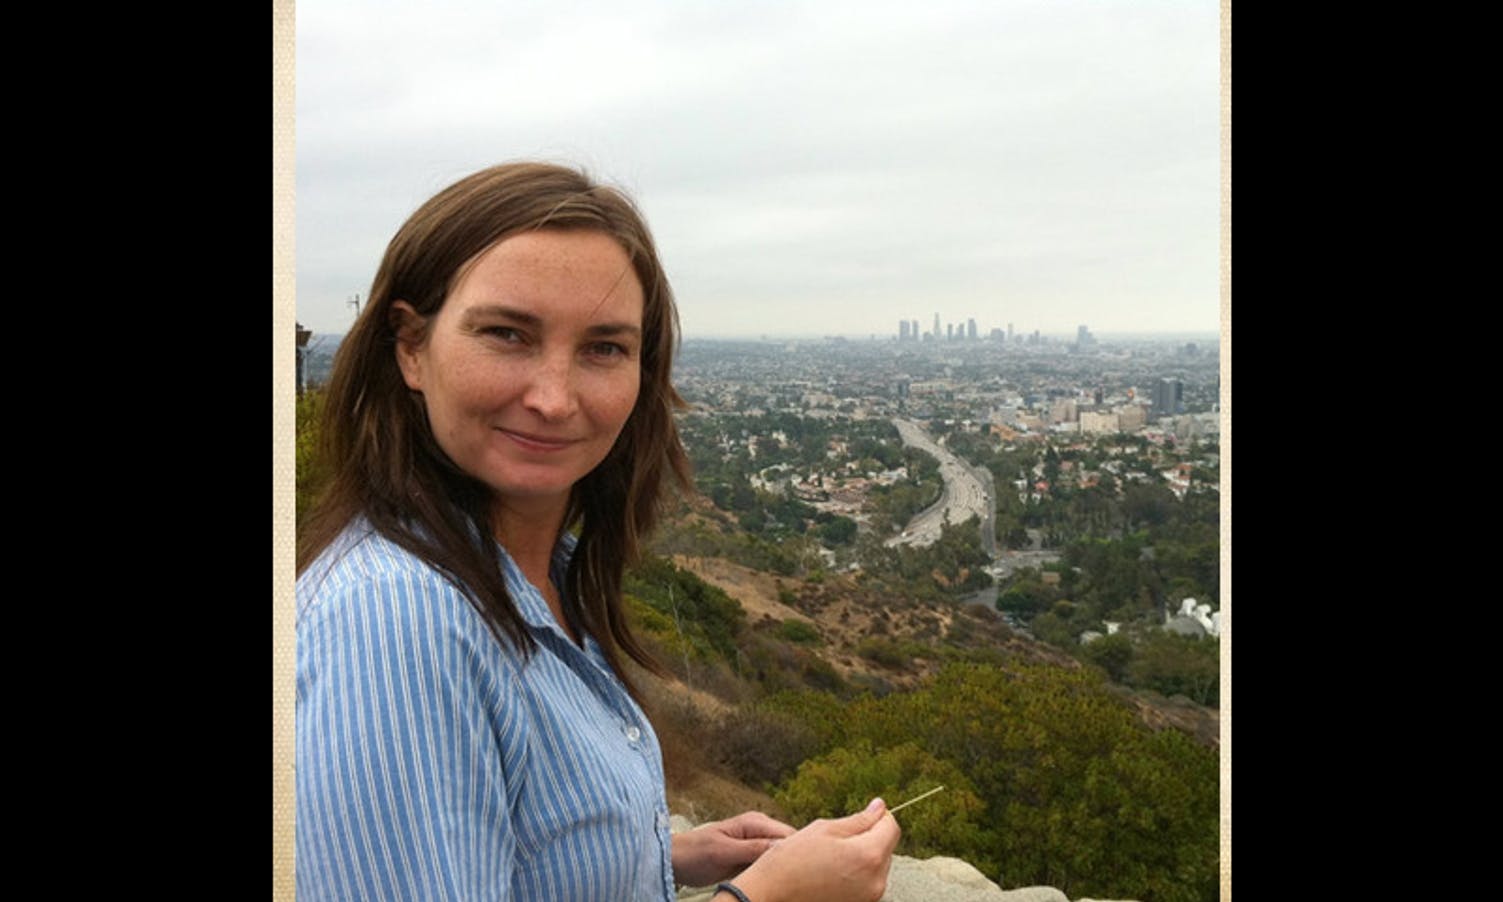 Ine at the Mulholland Drive viewpoint, overlooking Los Angeles, CA (foto: privat